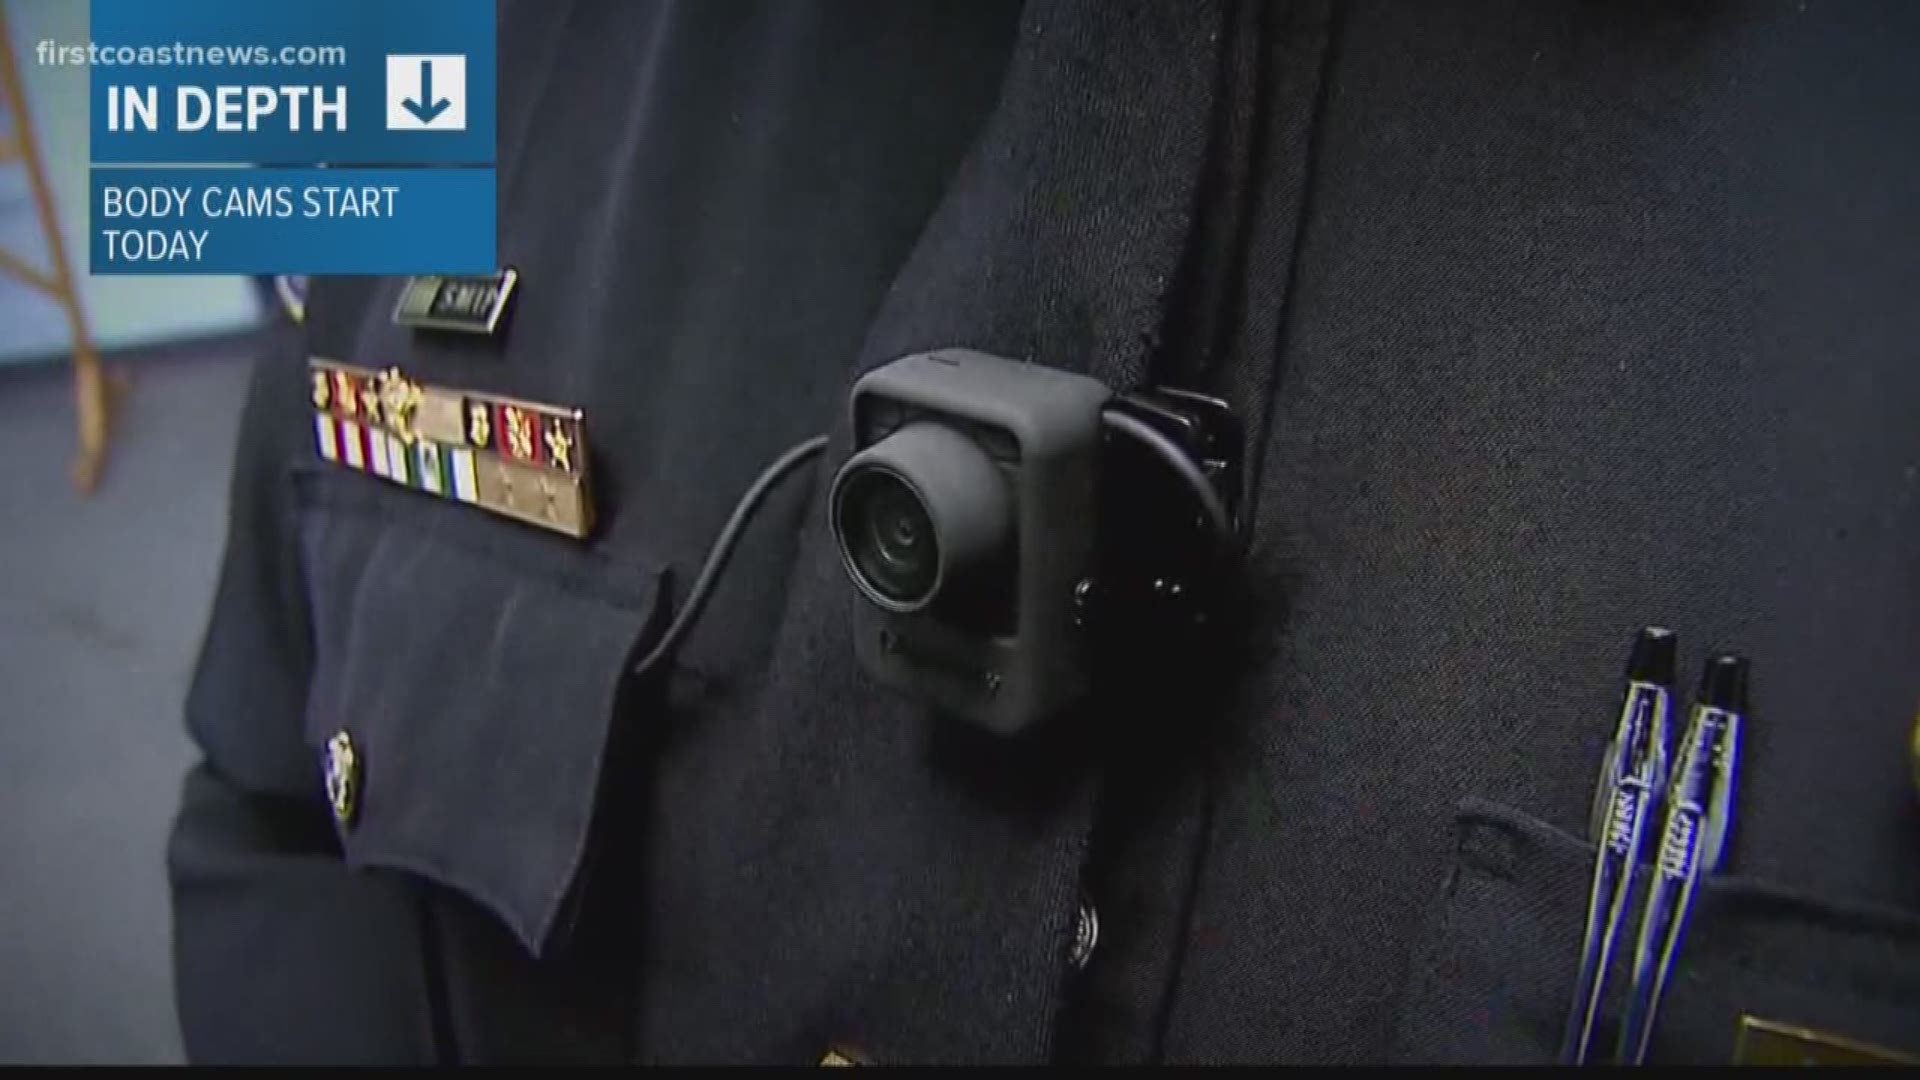 Phase one of what JSO is calling the Body Worn Camera Program starts Thursday, November 1. JSO says a full rollout of body-worn cameras will take approximately two years.